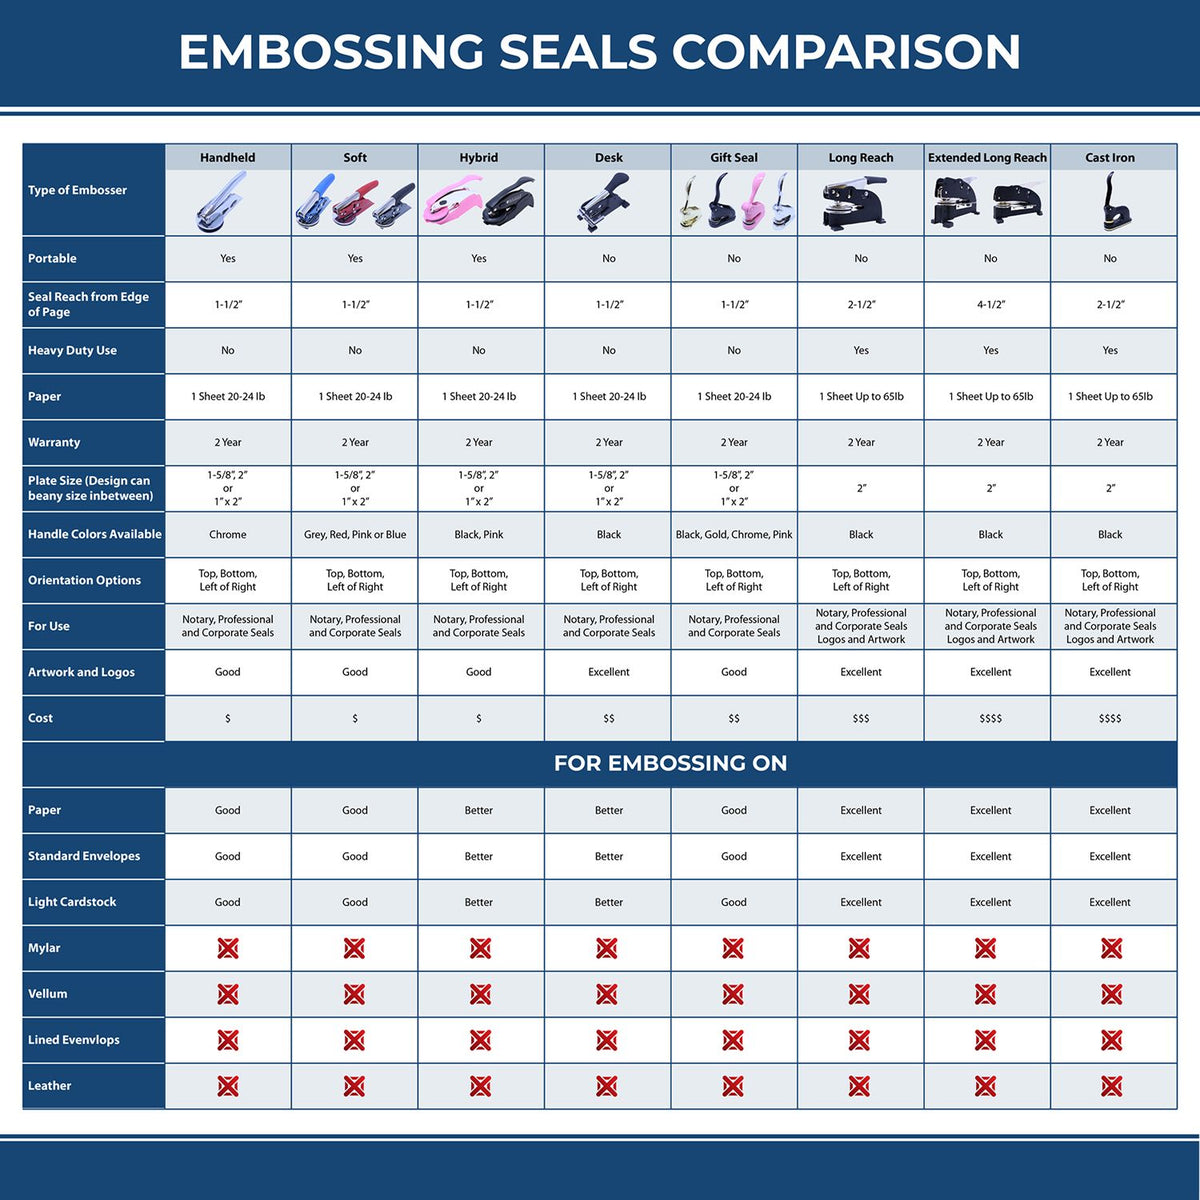 A comparison chart for the different types of mount models available for the Gift Tennessee Land Surveyor Seal